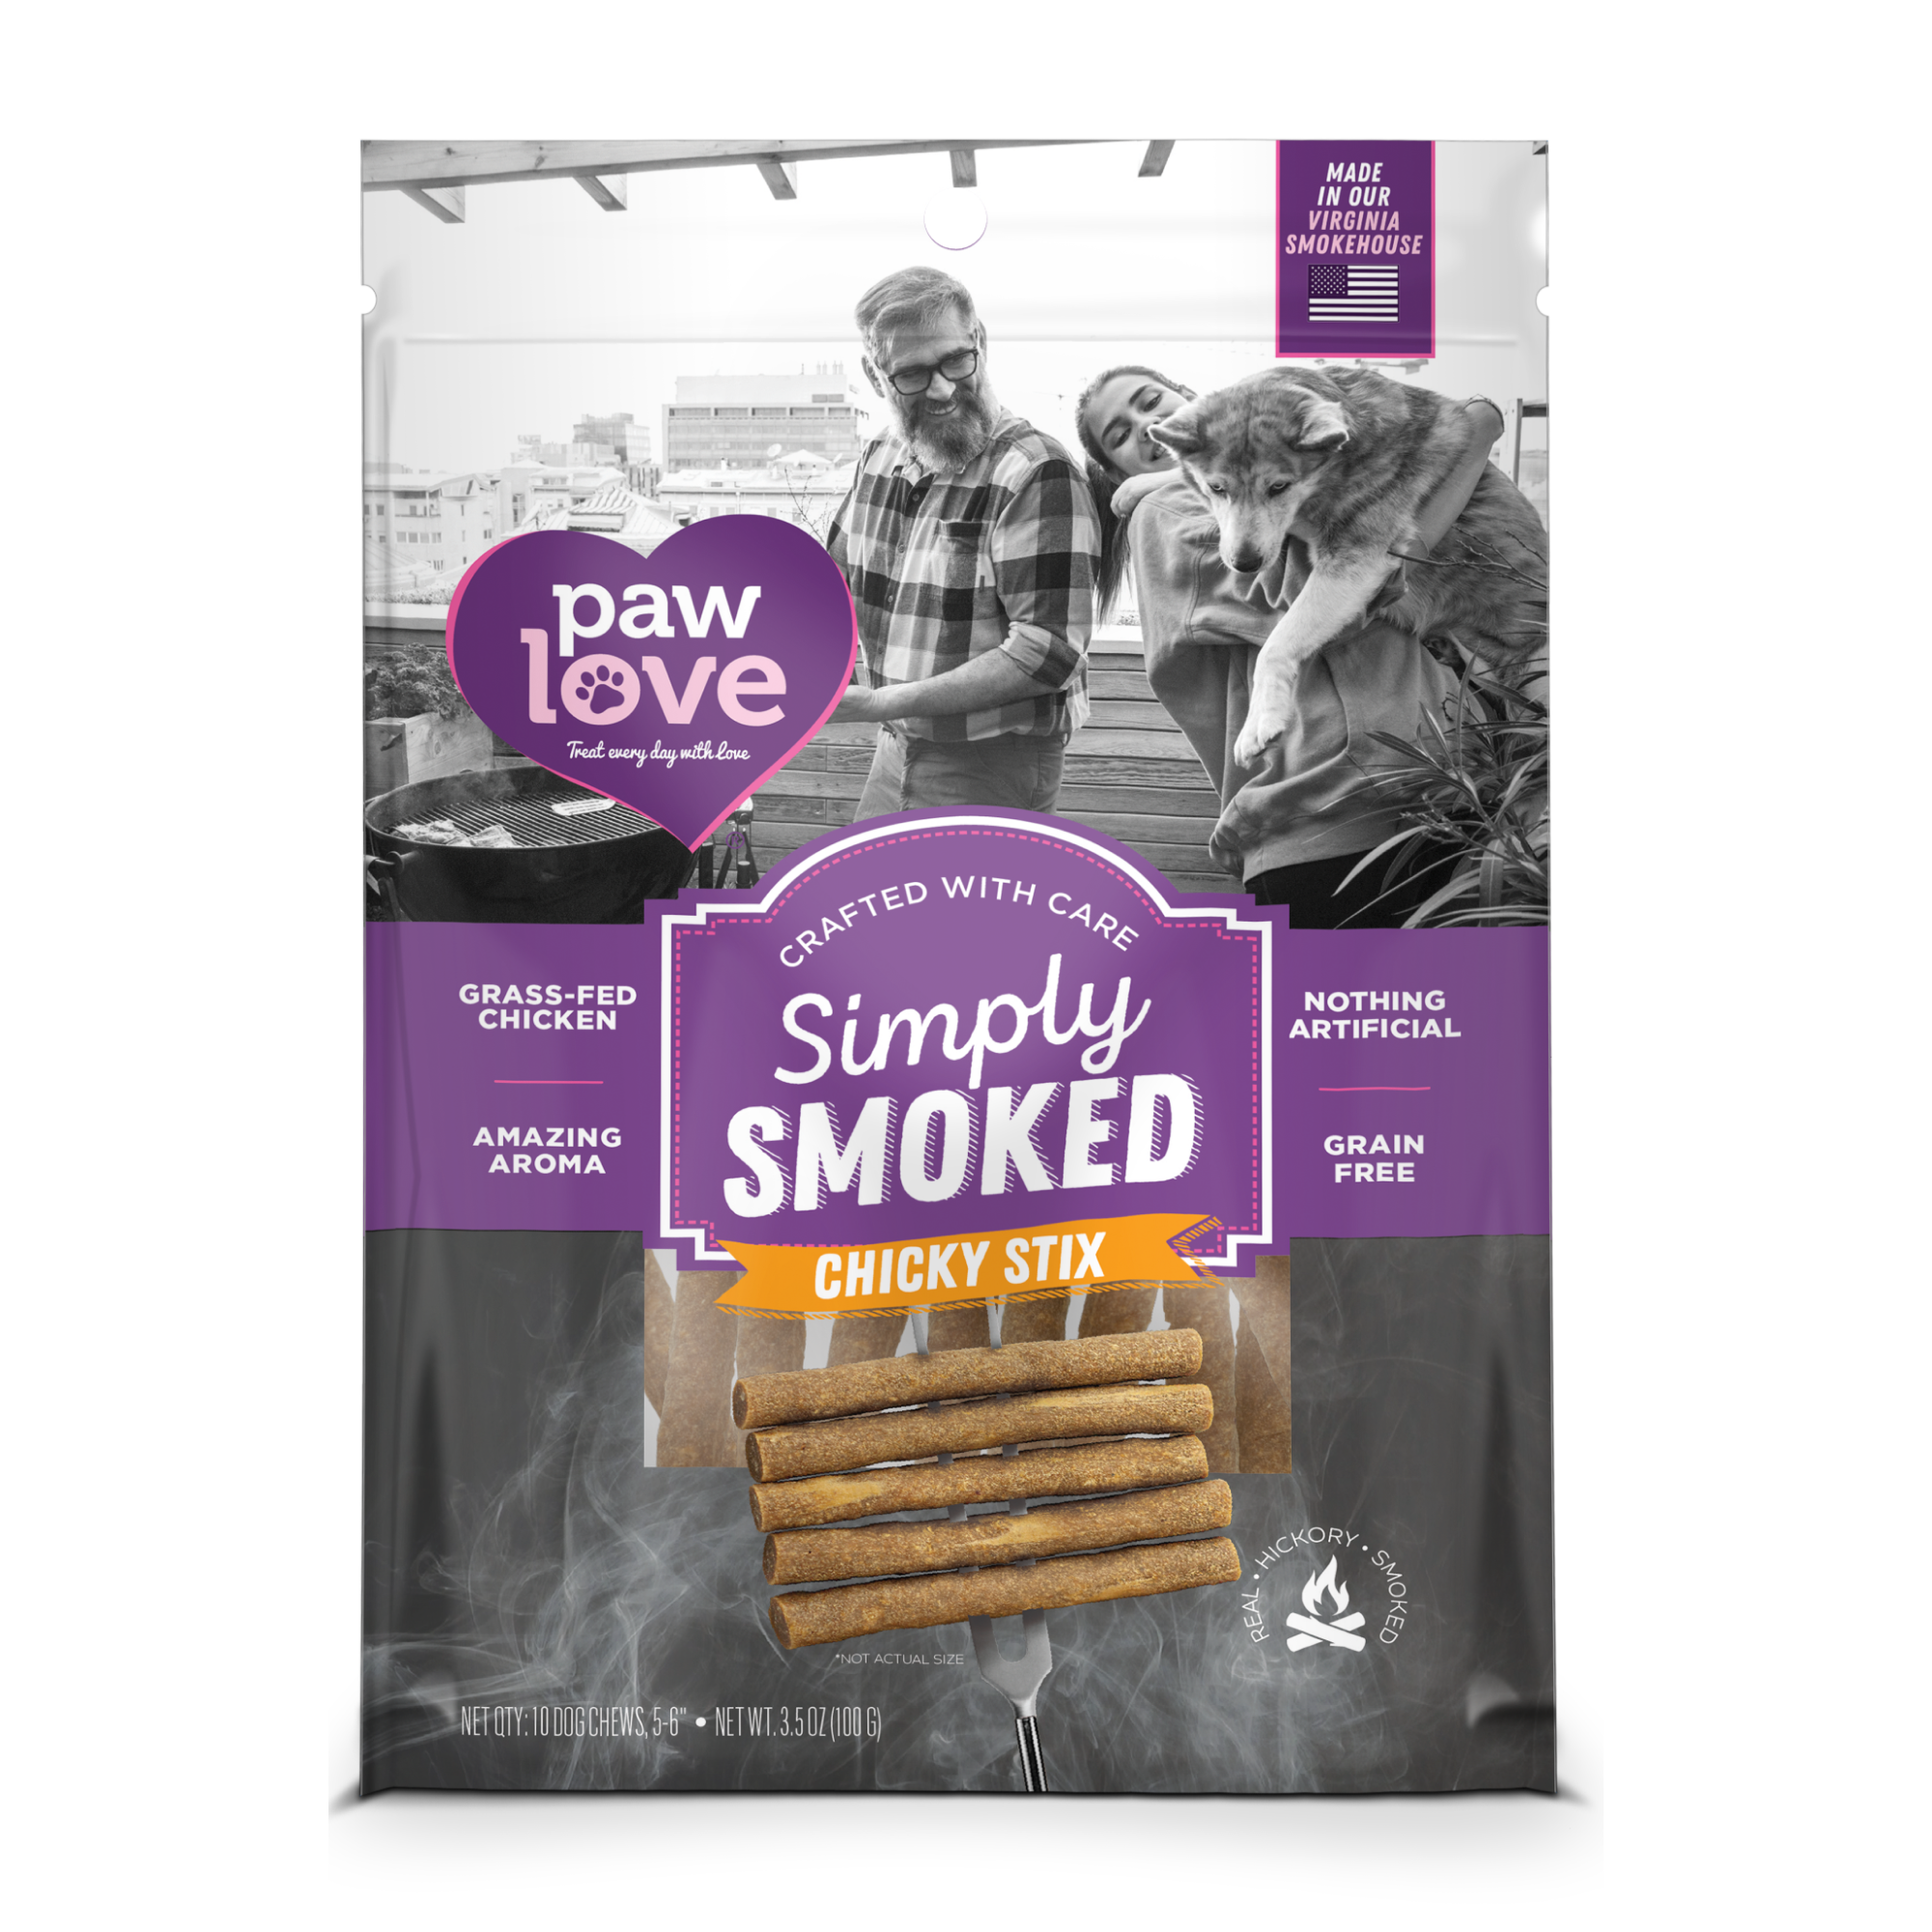 The Simply Smoked Chicky Stix 10 Pack by Paw Love is missing a description.